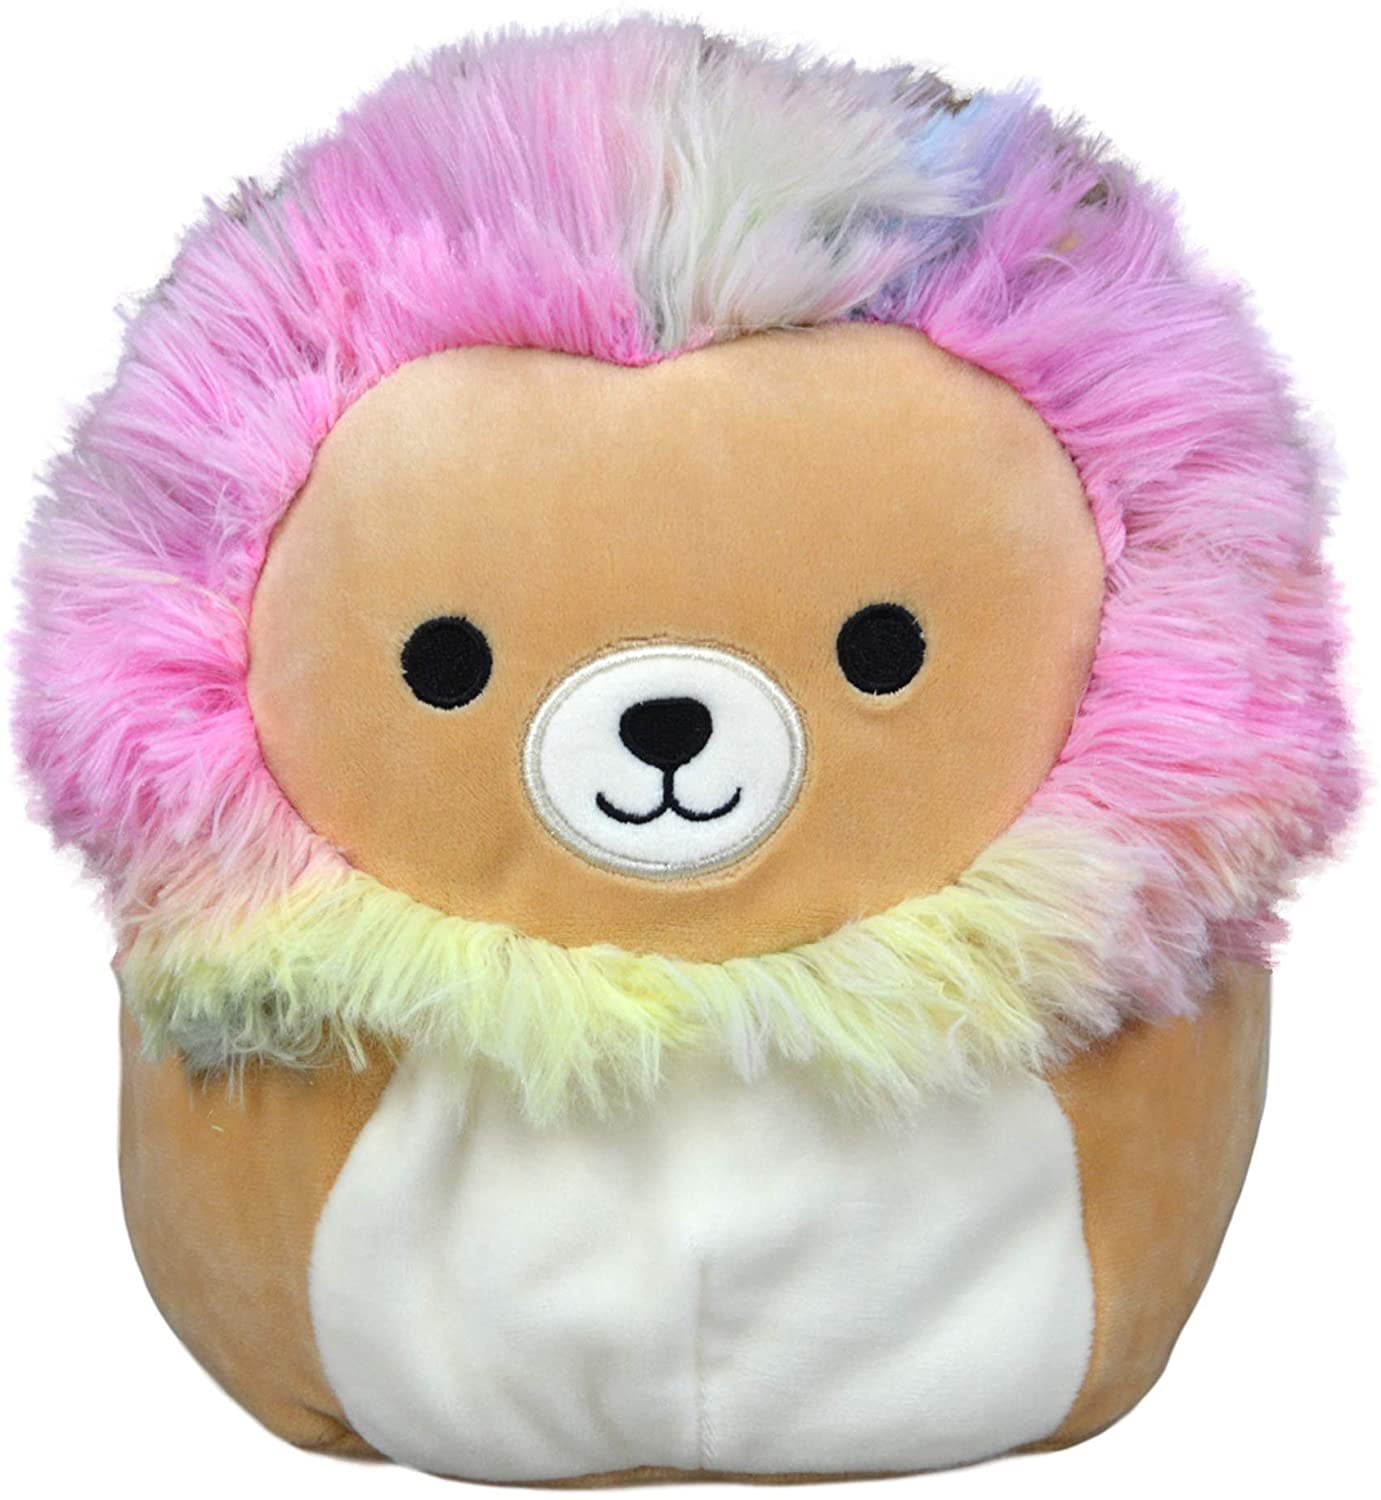 Squishmallows Leonard The Rainbow Lion 12 inch Plush Toy for sale online 